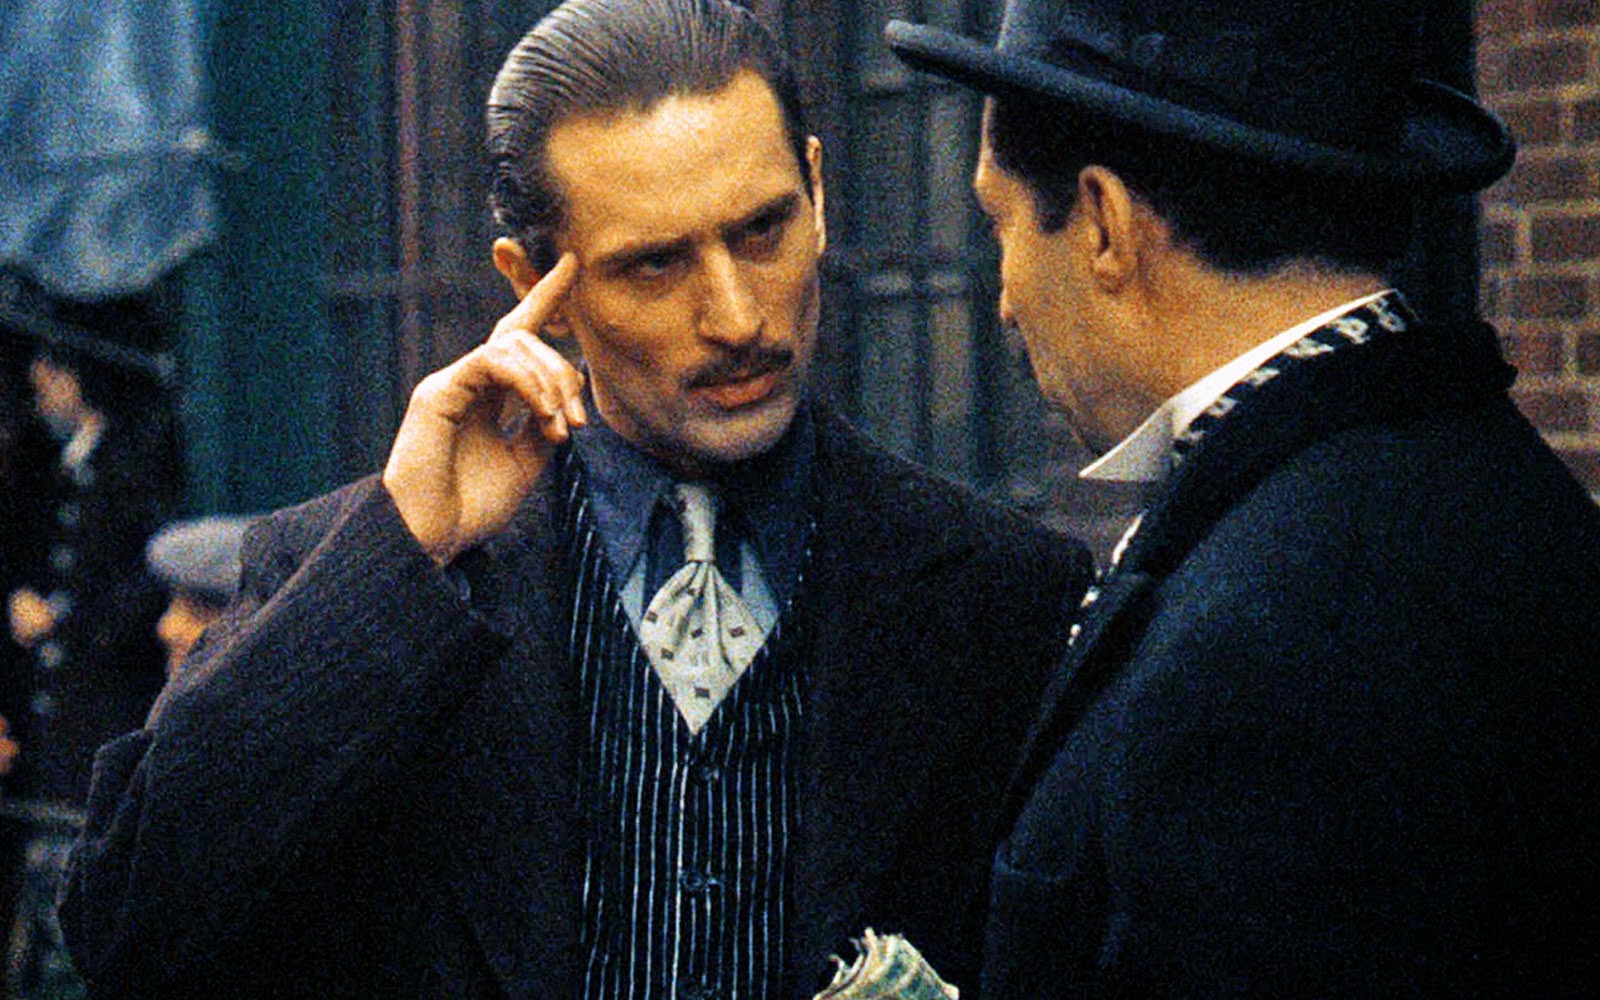 Screen Insight: The Godfather Part II (Francis Ford Coppola, 1974)